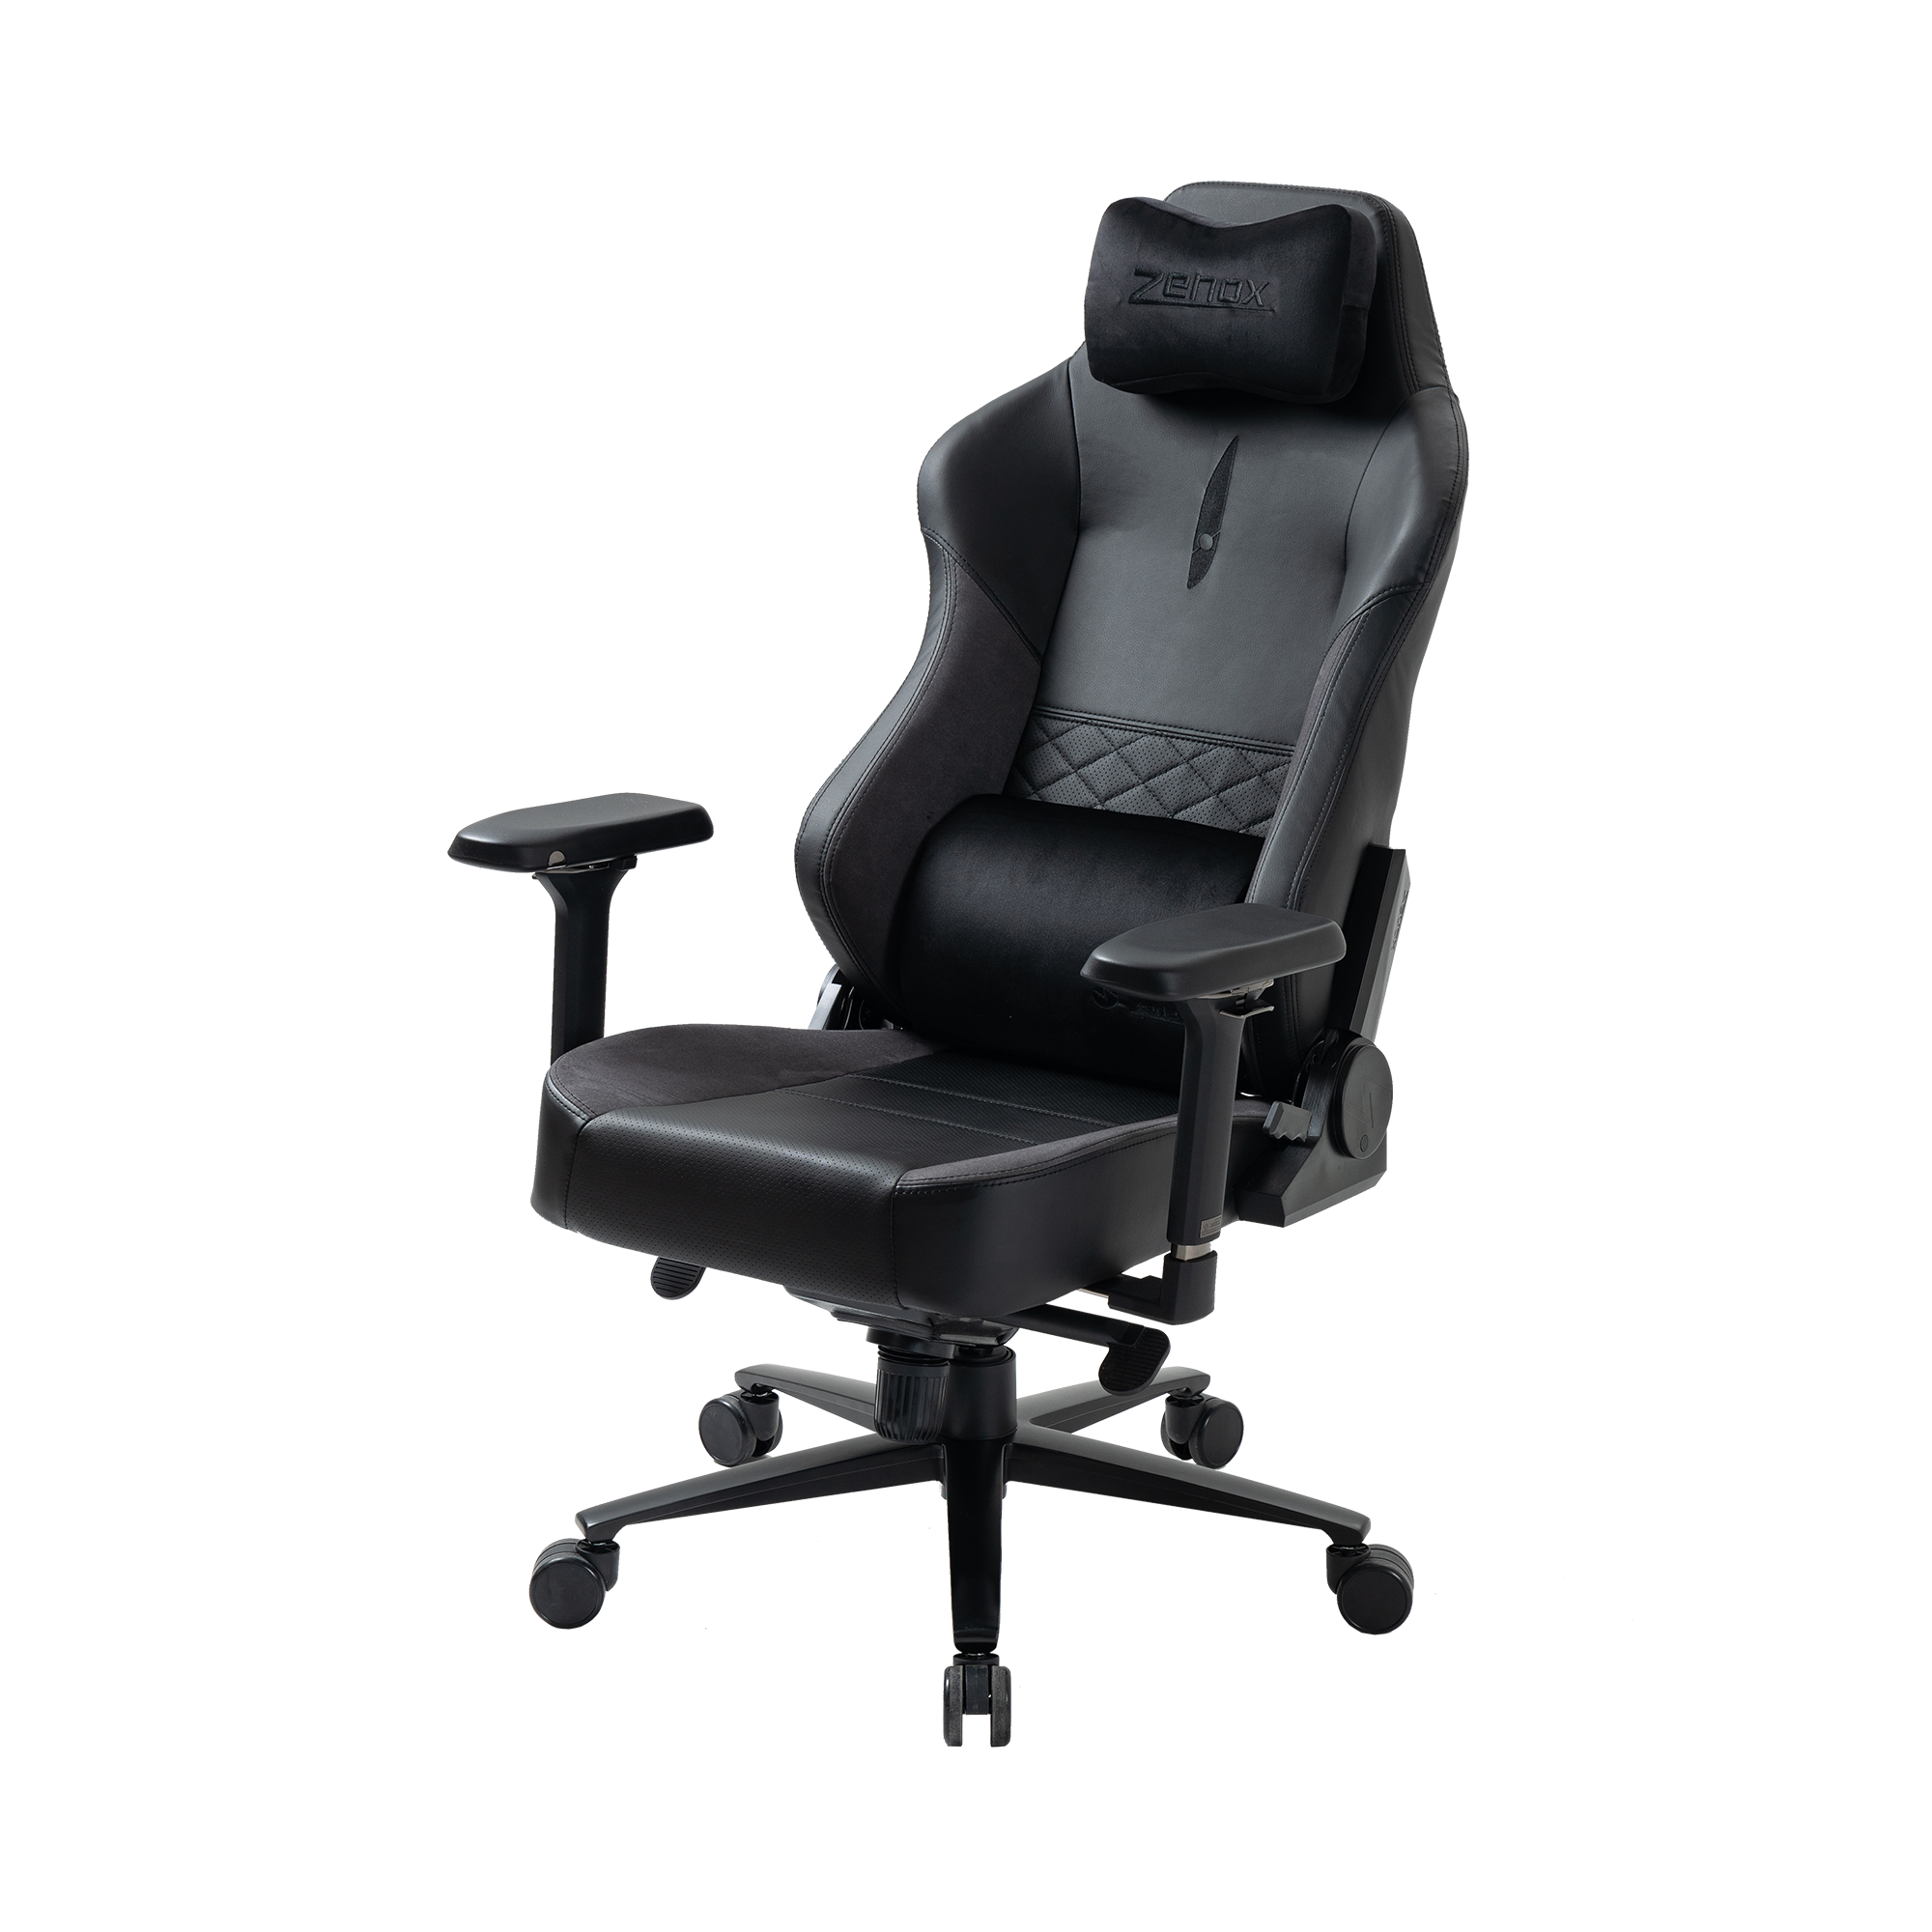 Zenox Spectre Mk-2 Gaming Chair (Leather/Charcoal)